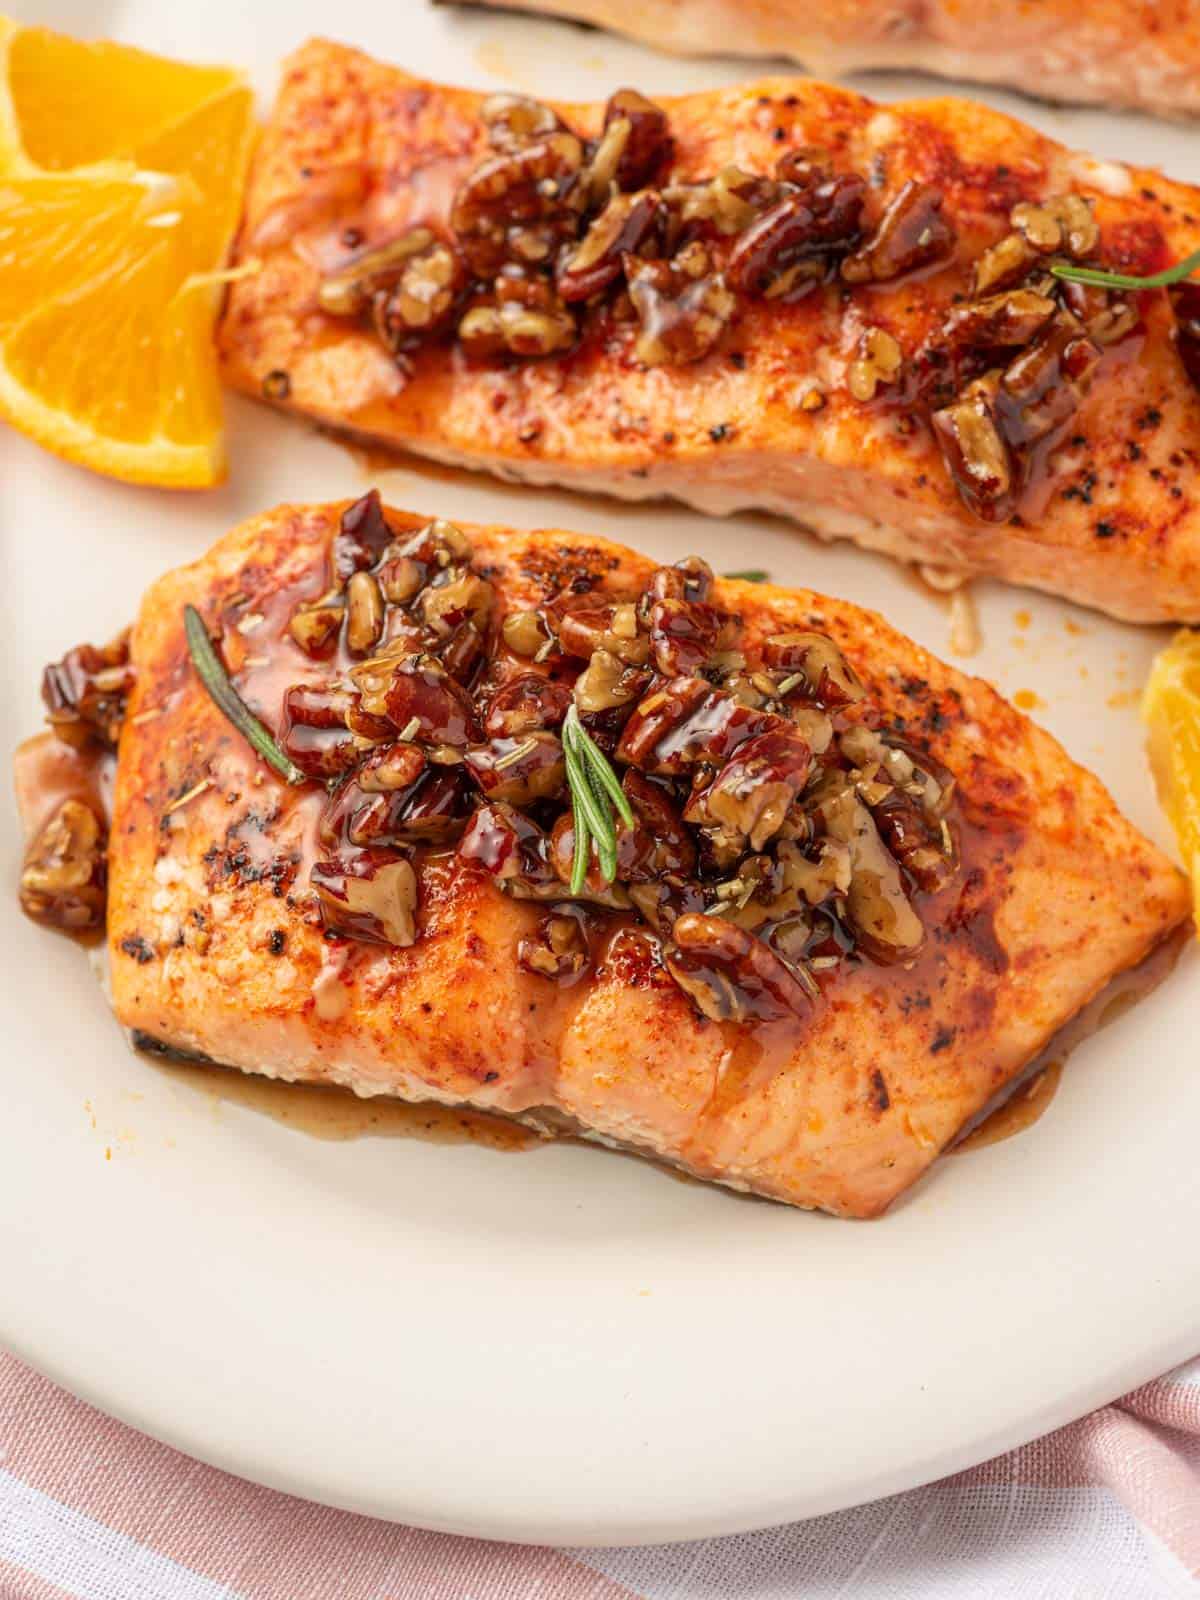 Salmon with maple syrup and pecans on a platter.